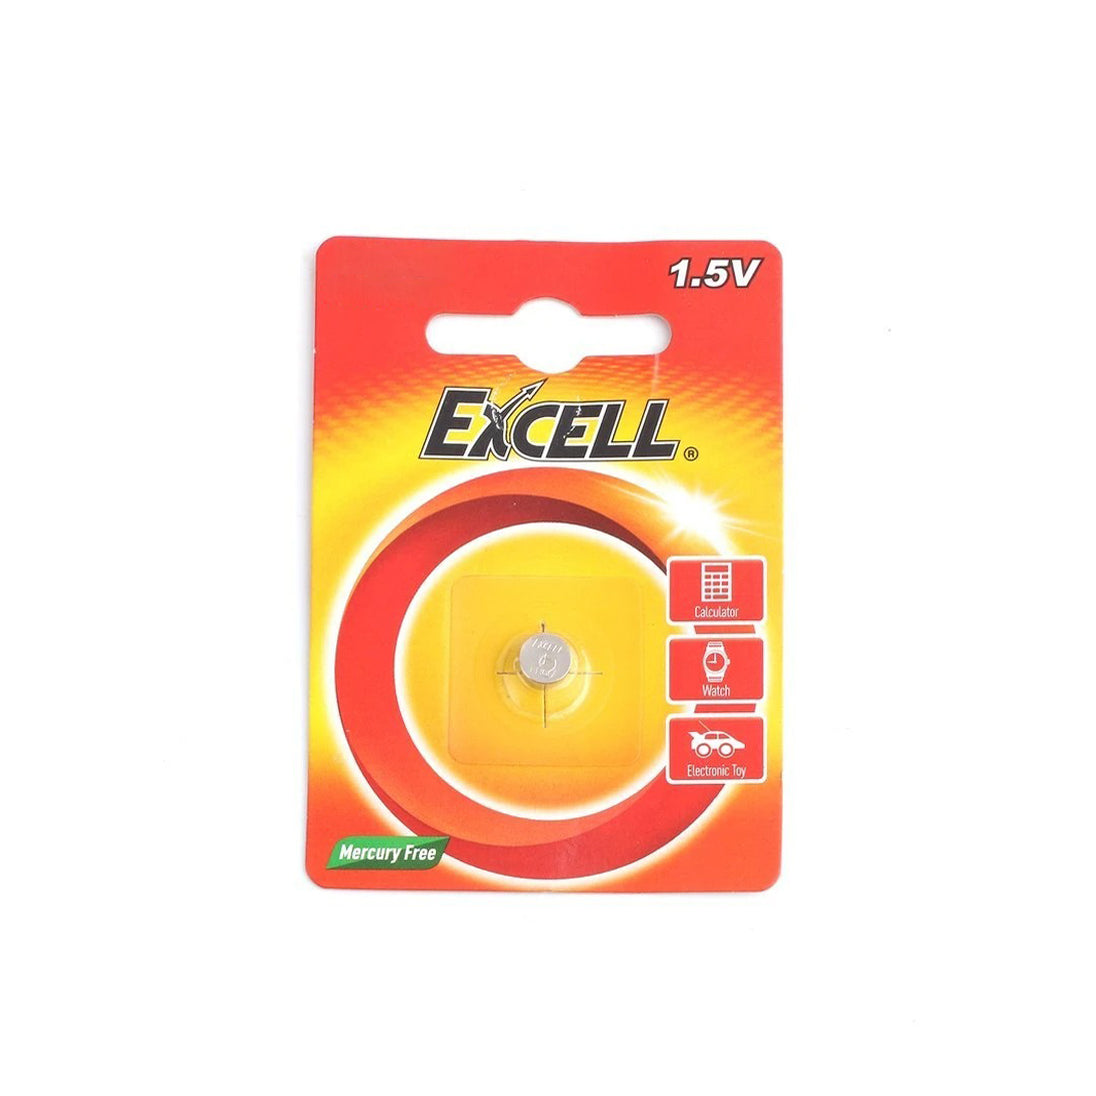 Excell CR 1.5V Button Cell Battery LR54